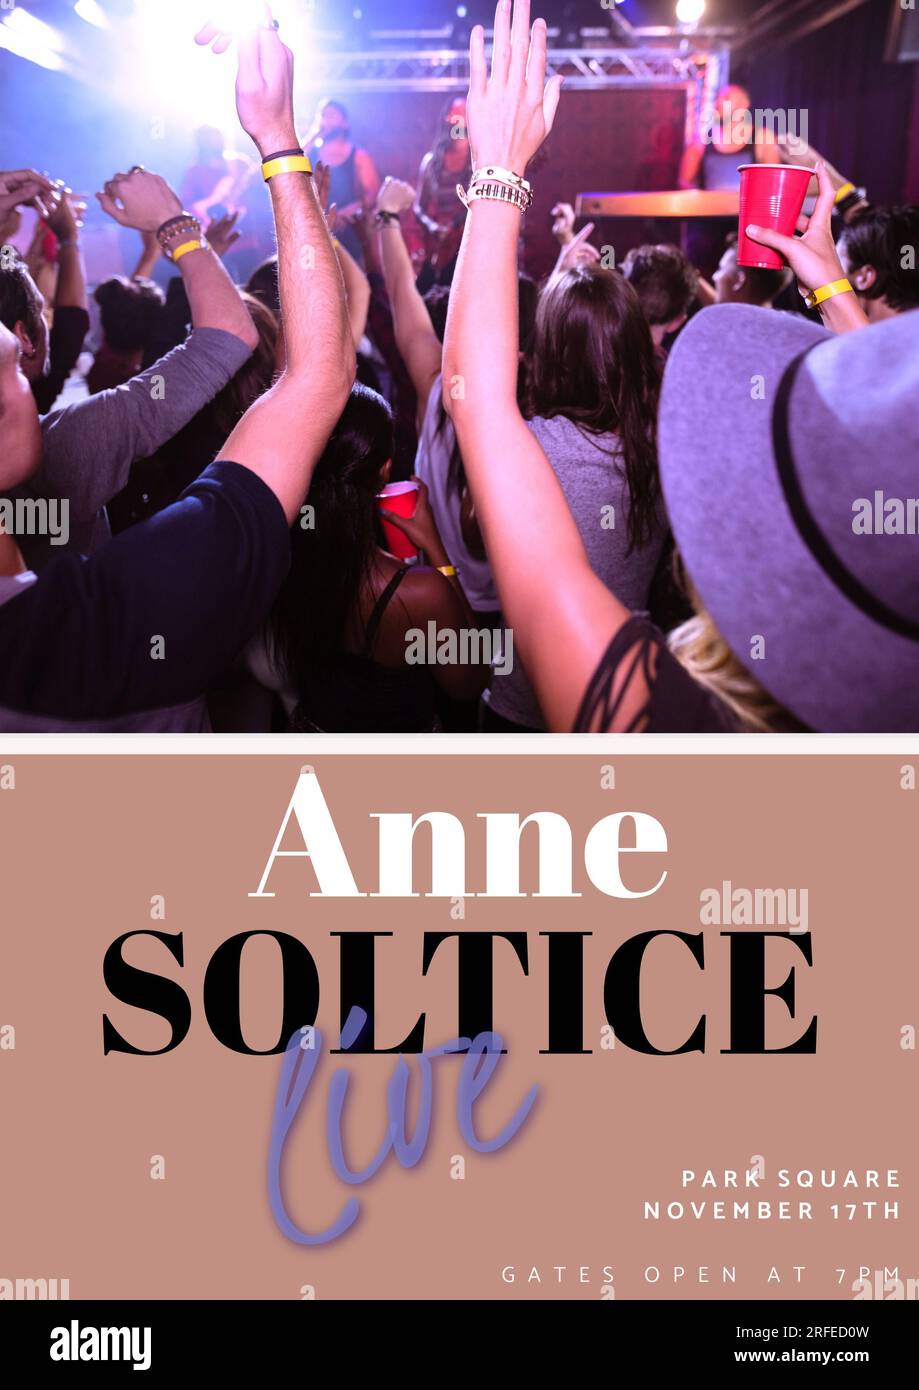 Anne soltice live, park square, november 17th, gates open at 7pm, diverse people enjoying at concert Stock Photo